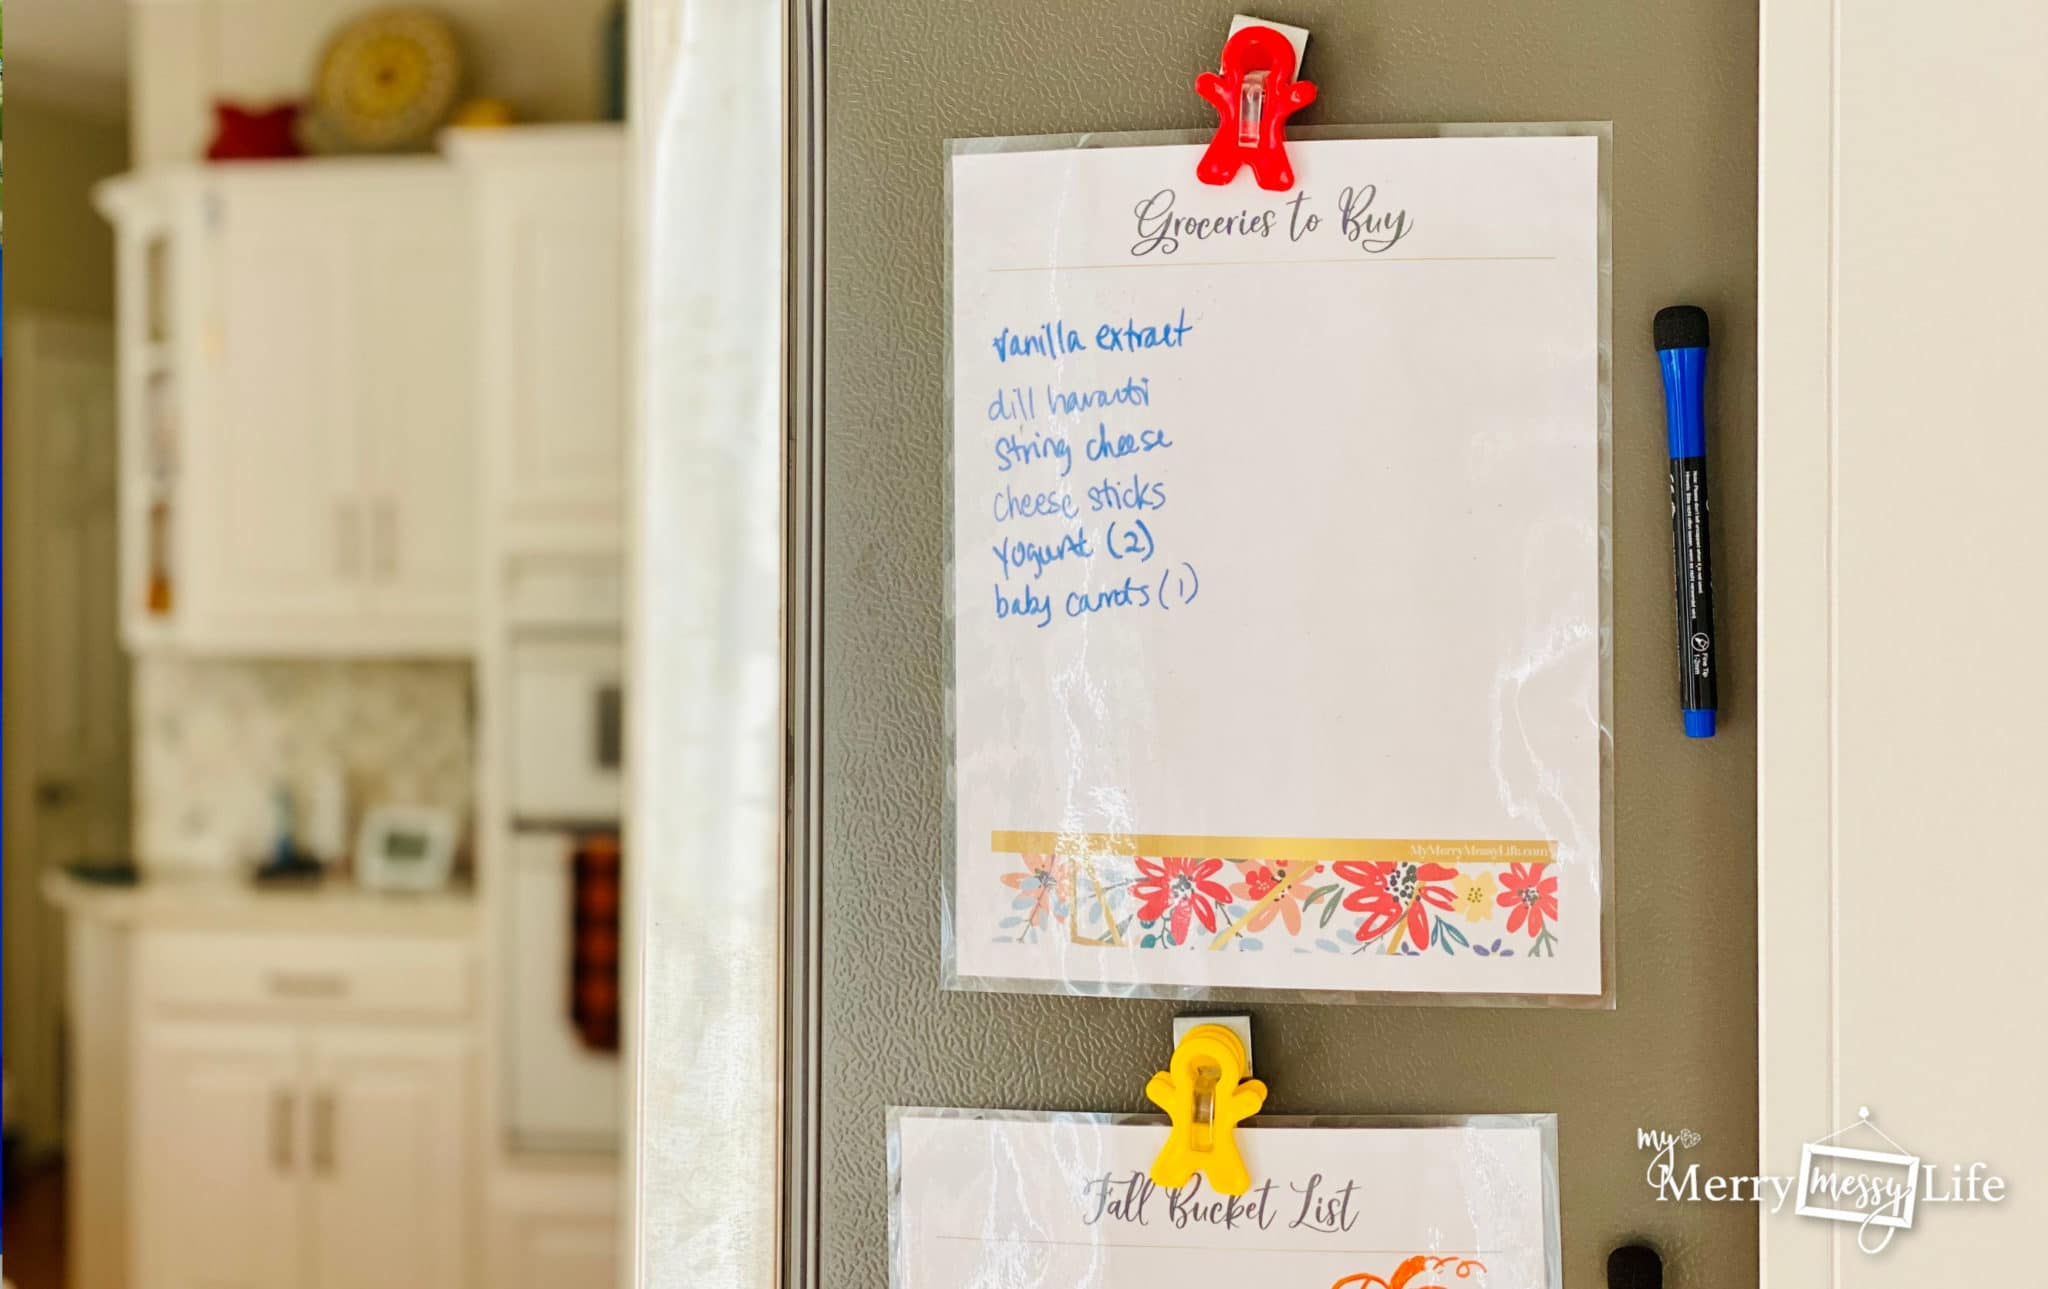 How to Meal Plan - Keep a Grocery list on the fridge so everyone in the family can add food to the list when it goes out of stock. Flylady System